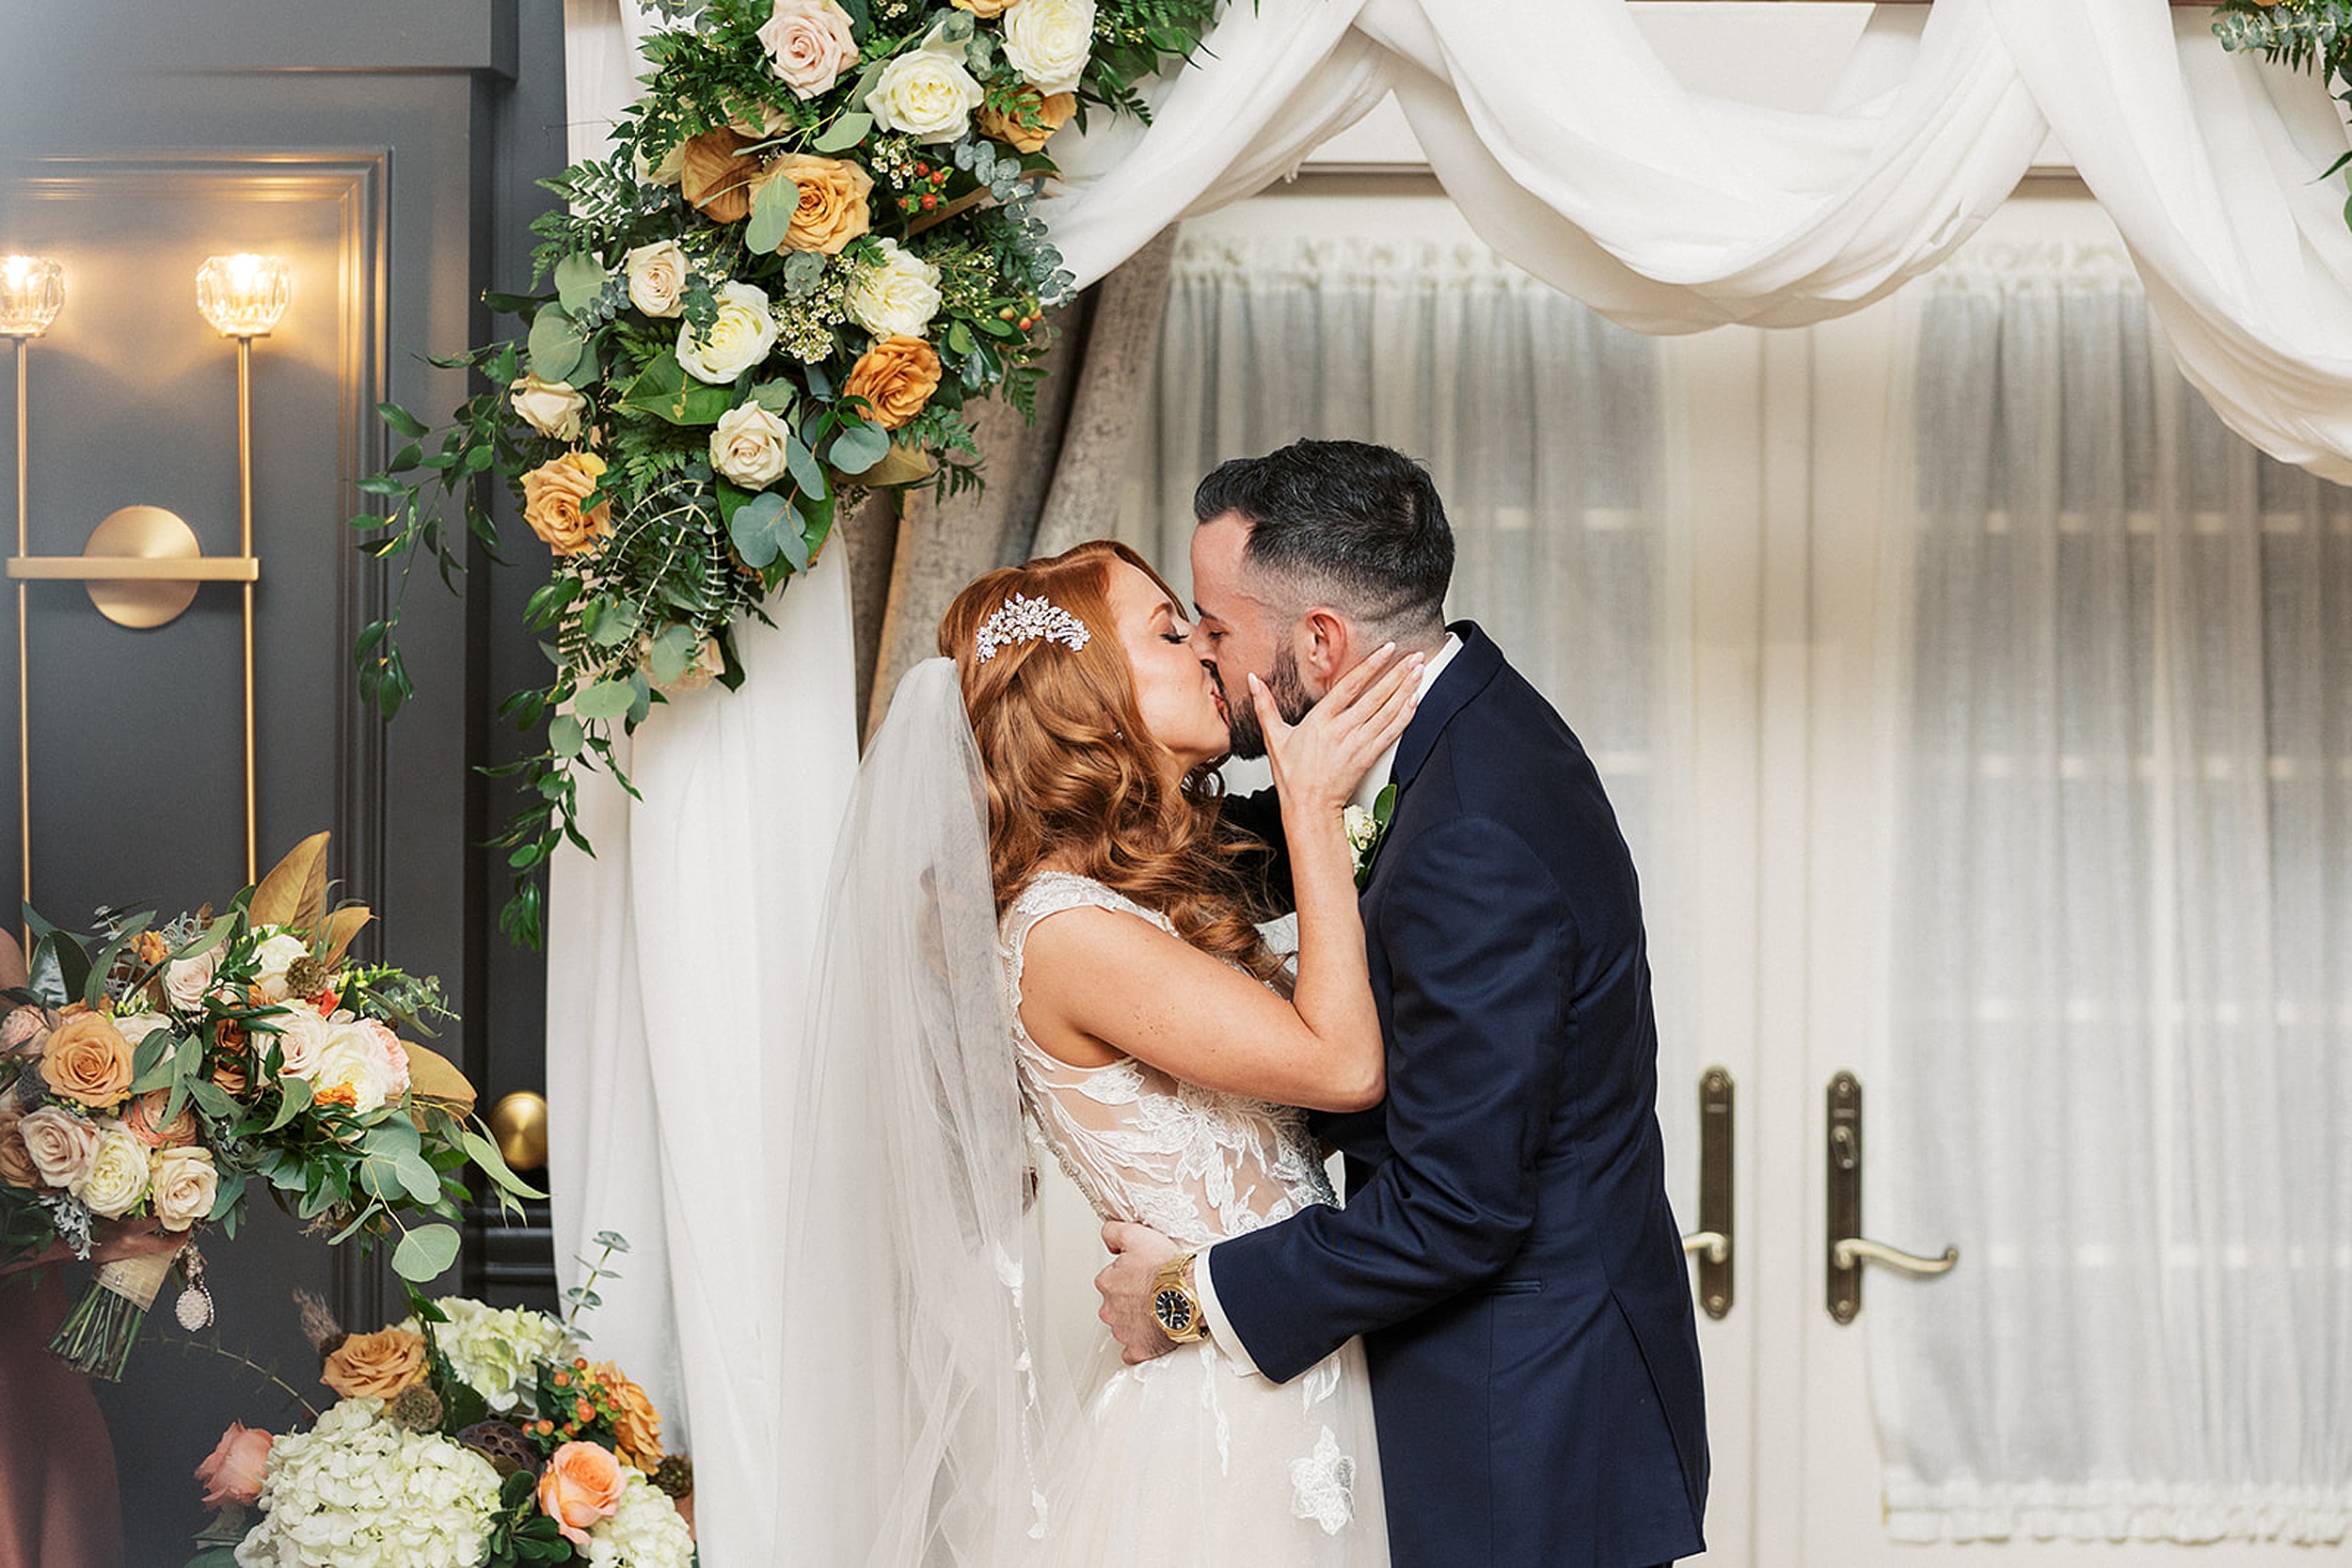 Newlyweds kiss under the arbor covered in white linen and flowers at a David's country inn wedding